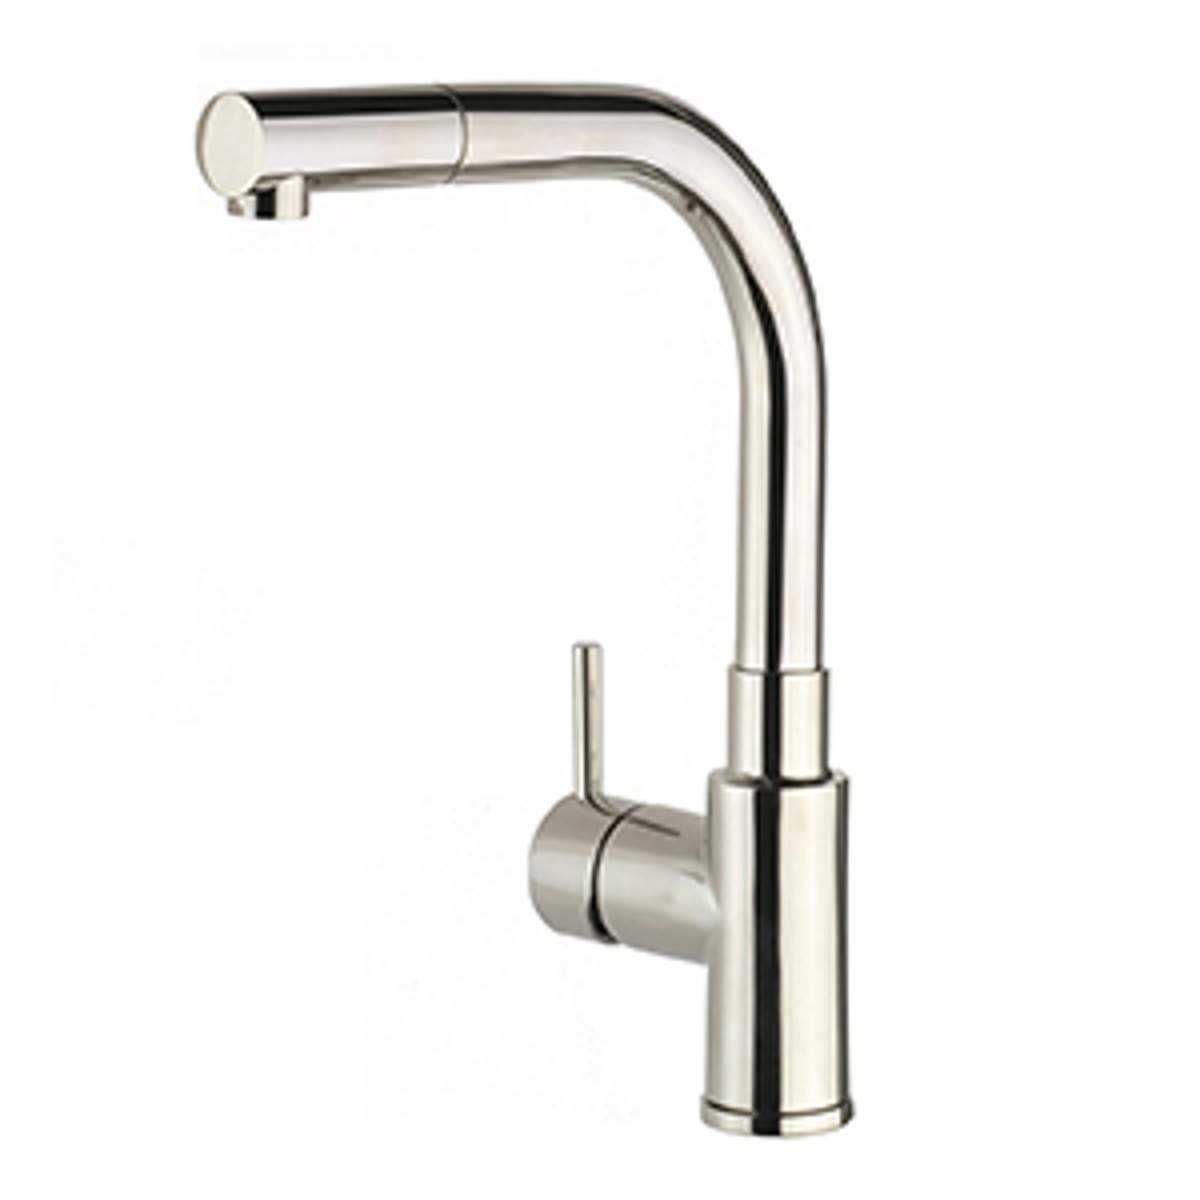 JTP Apco Stainless Steel Pull Out Sink Mixer (APS181)